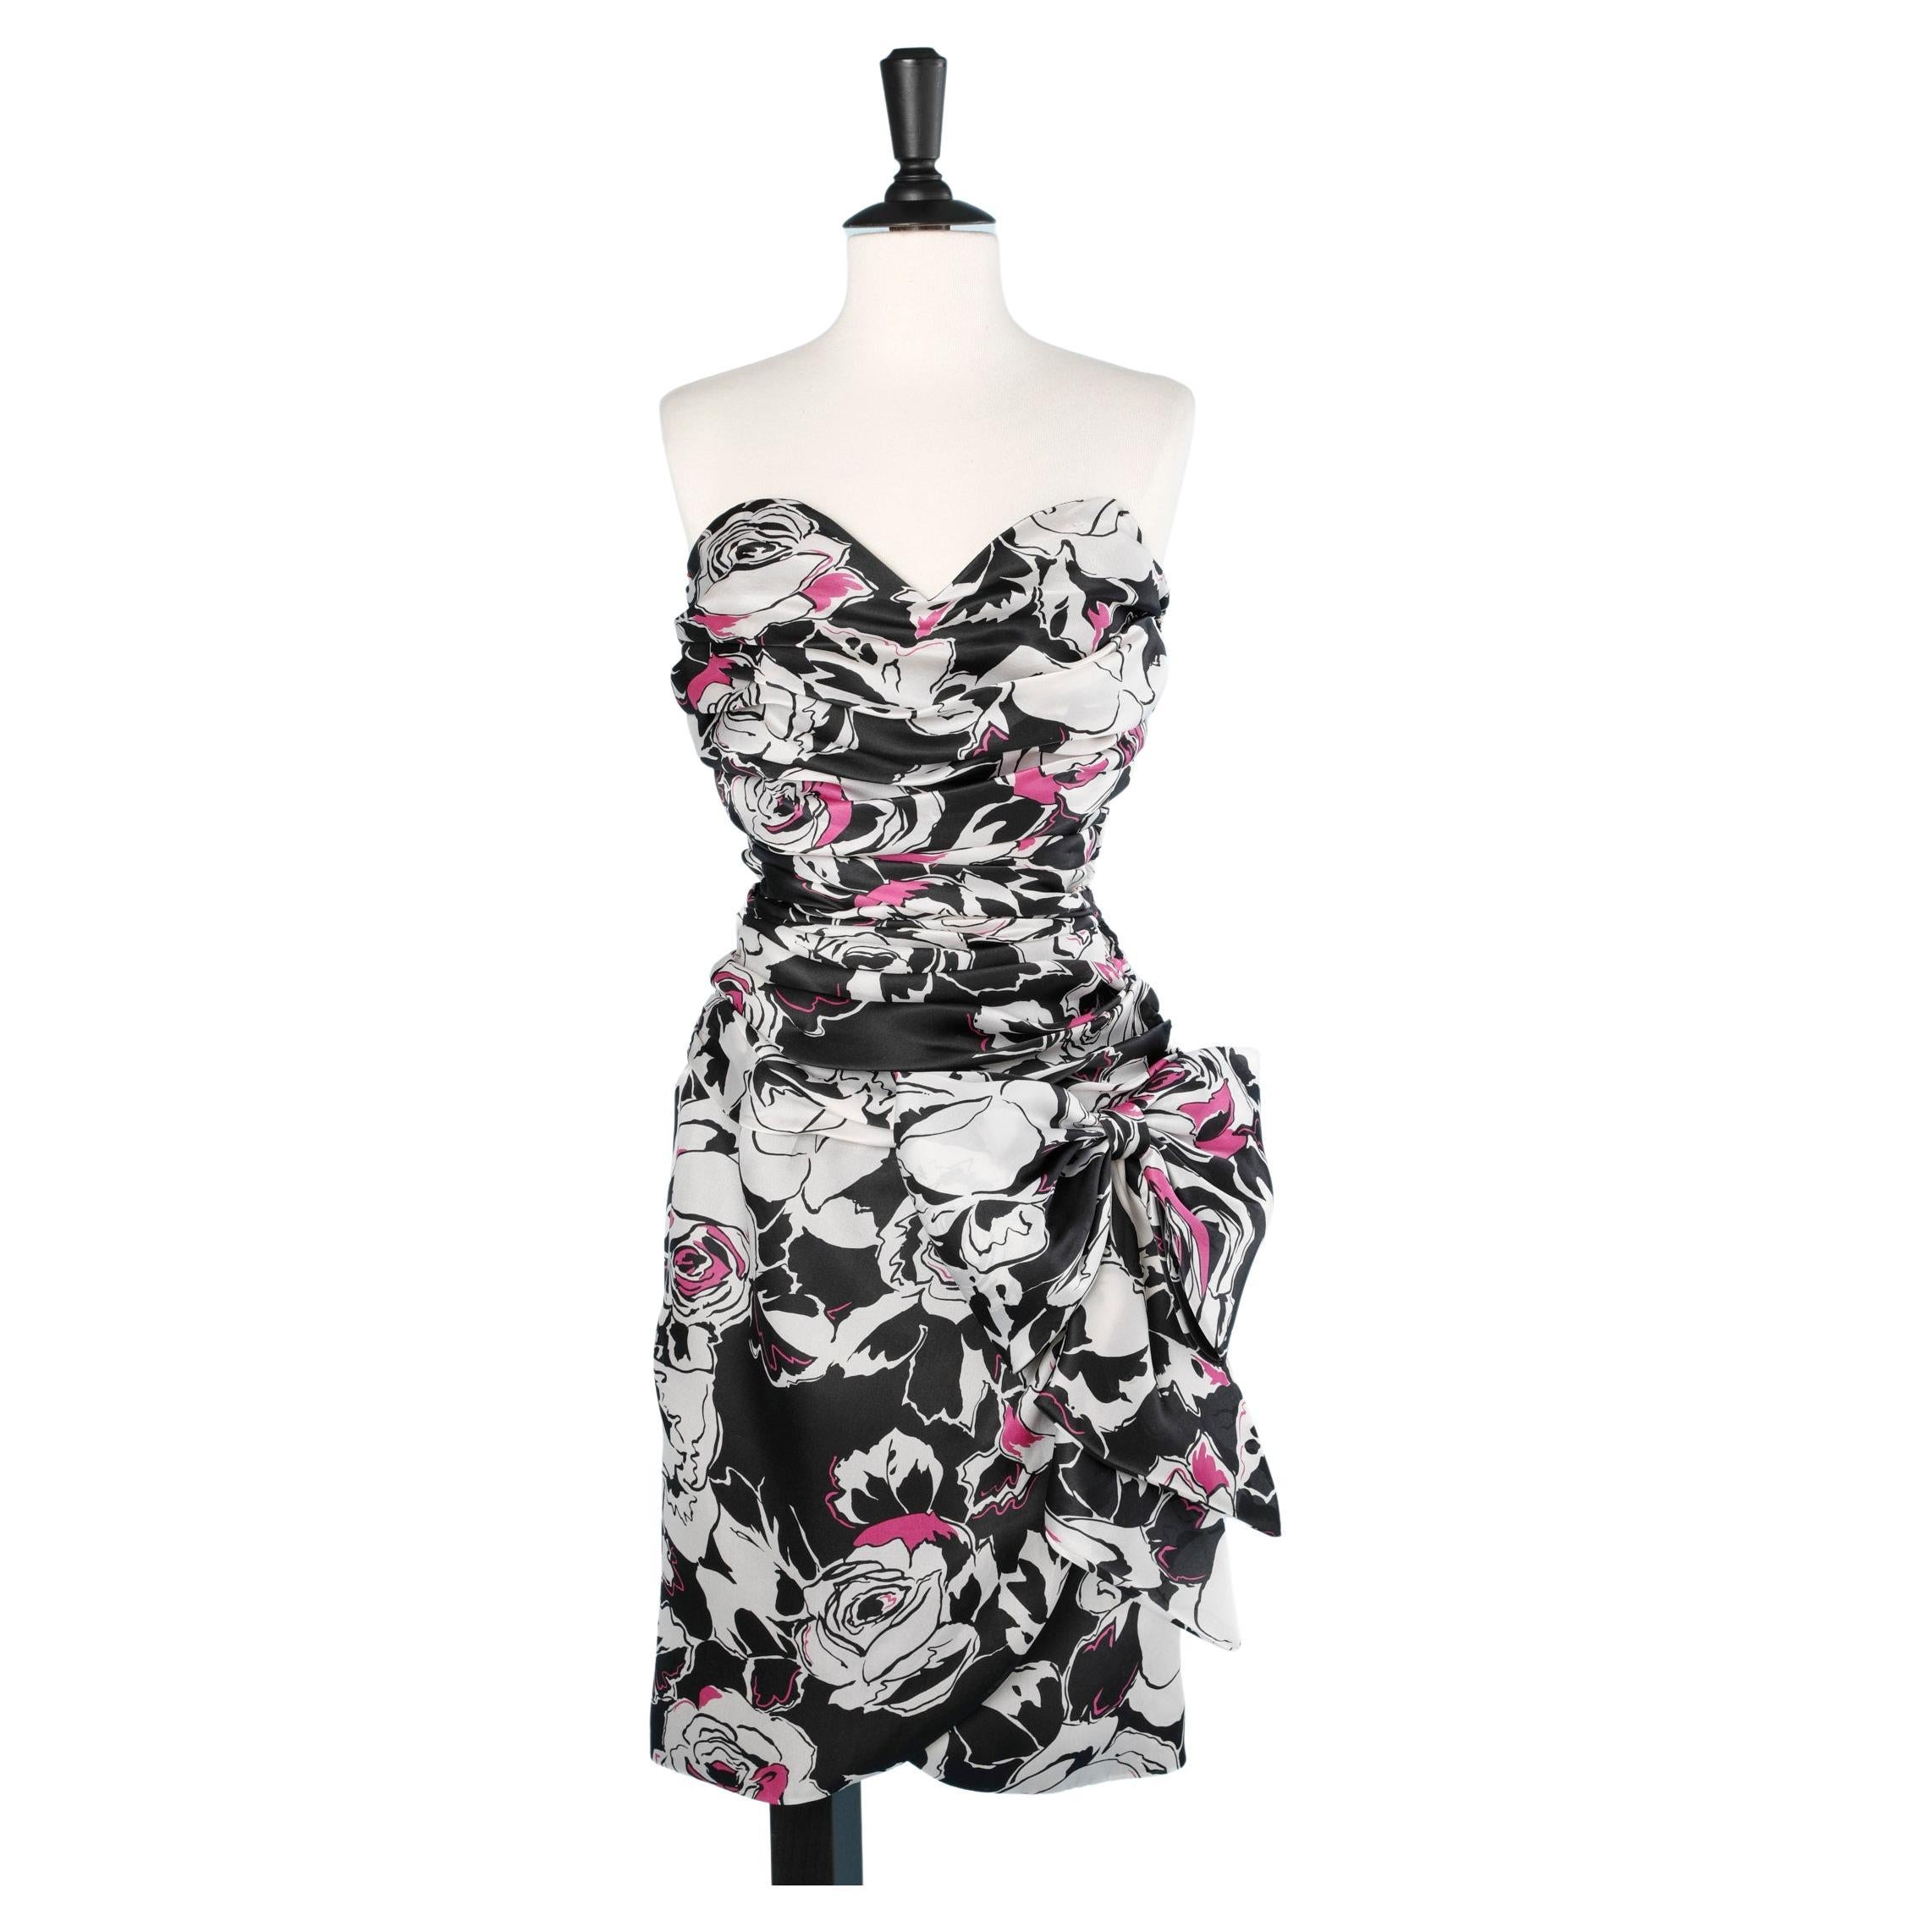 Draped and printed organza bustier cocktail dress C.D de Christian Dior 